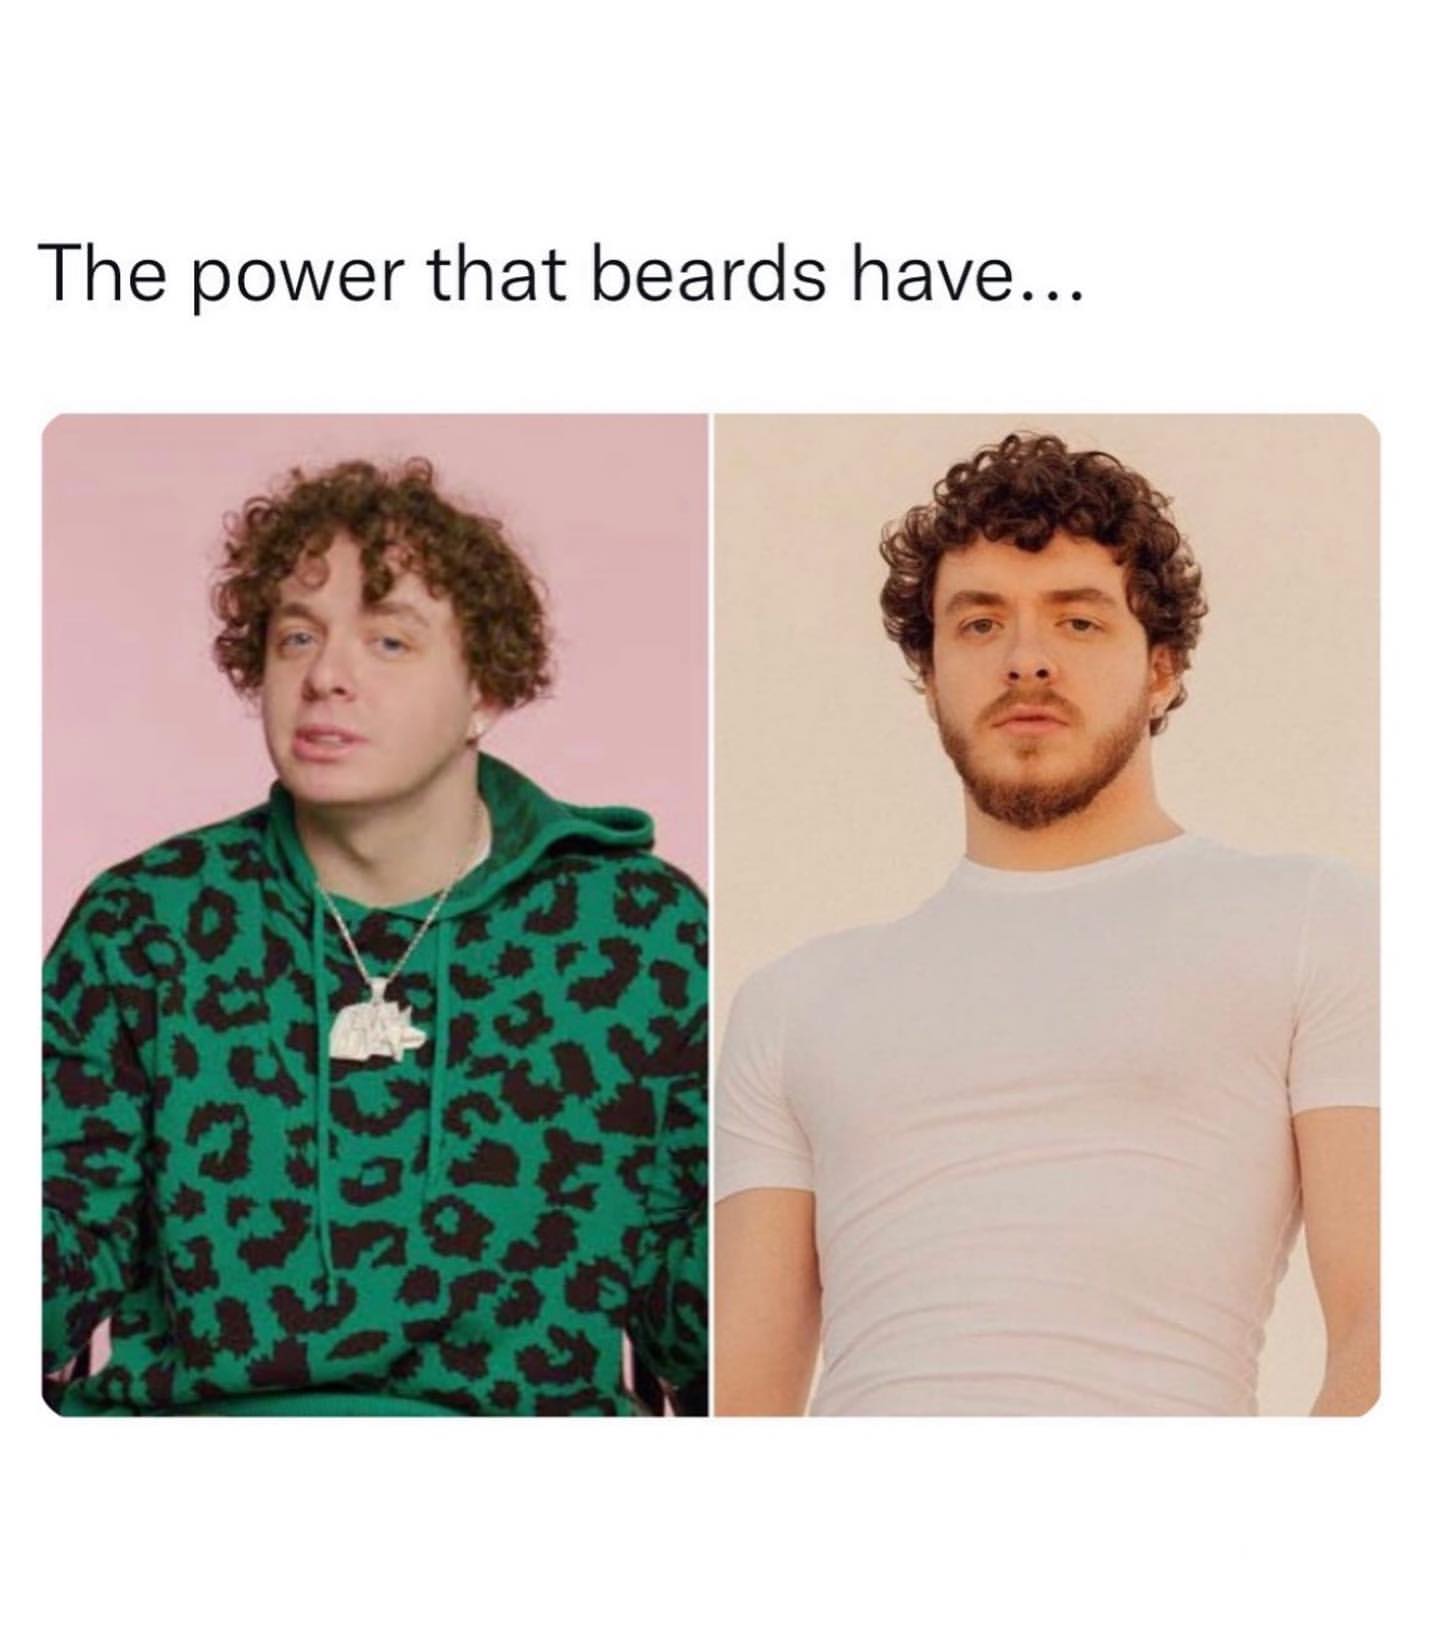 The power that beards have...